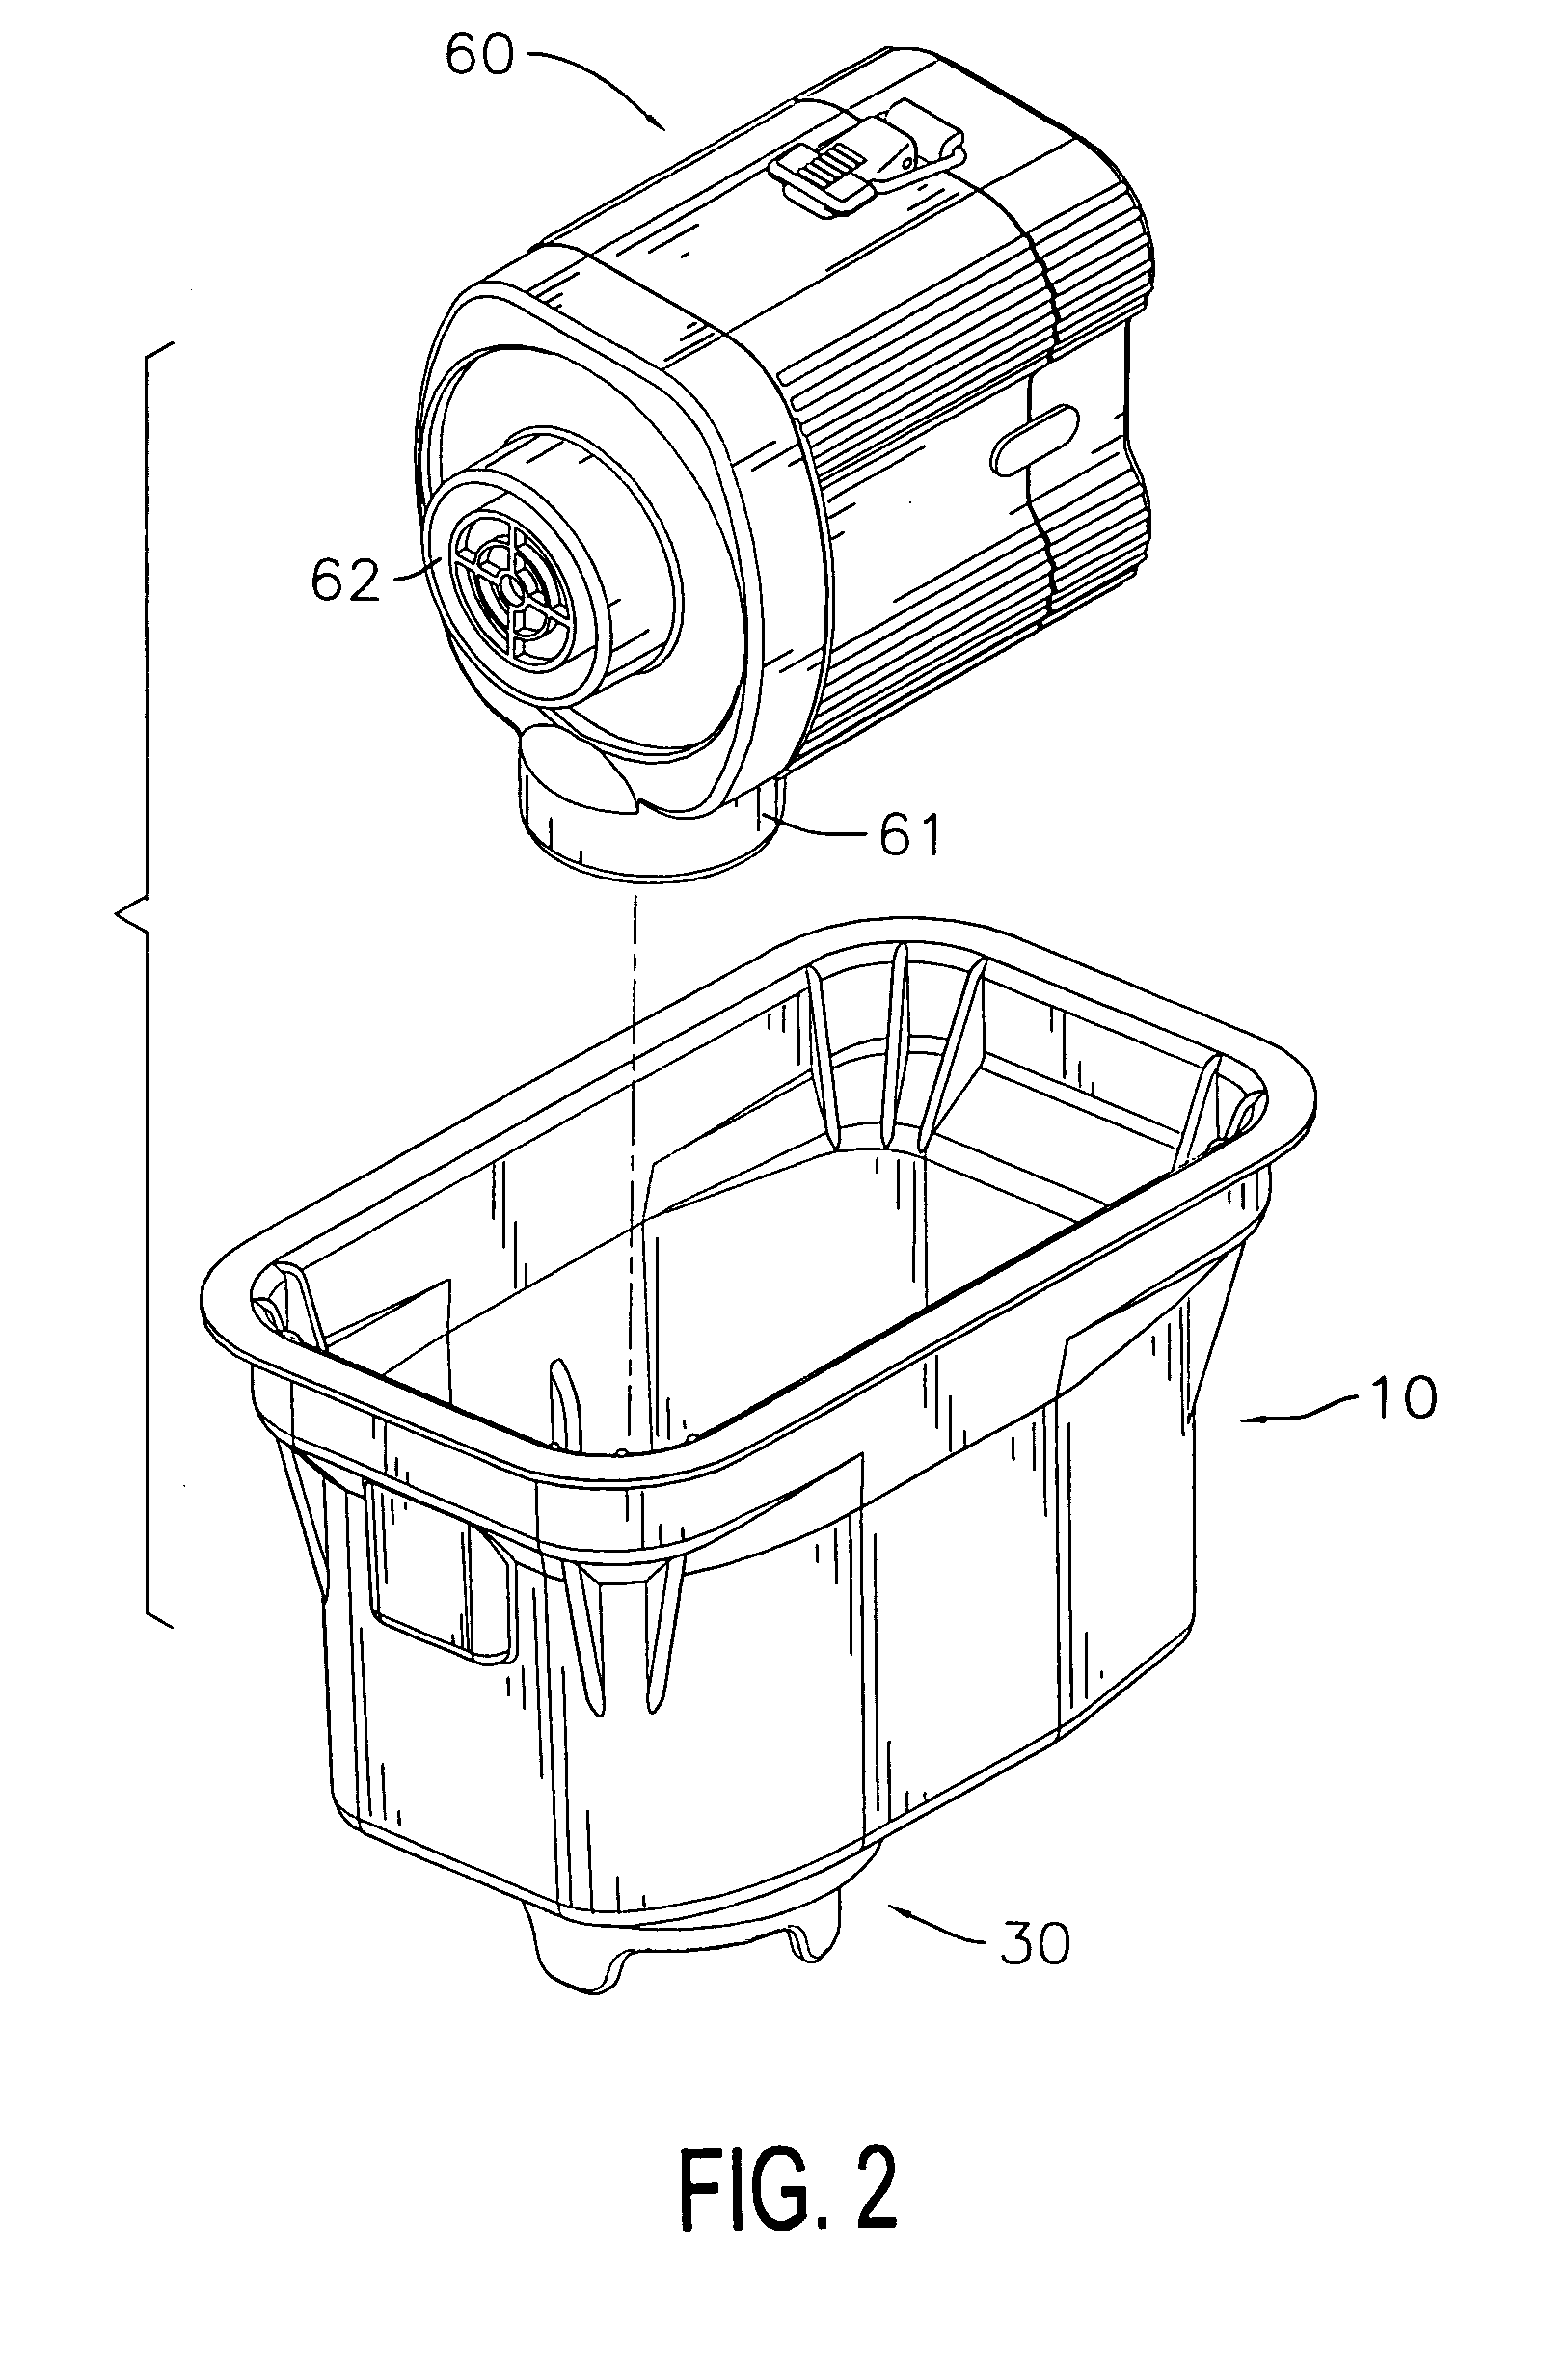 Bidirectional air pump assembly for inflatable objects